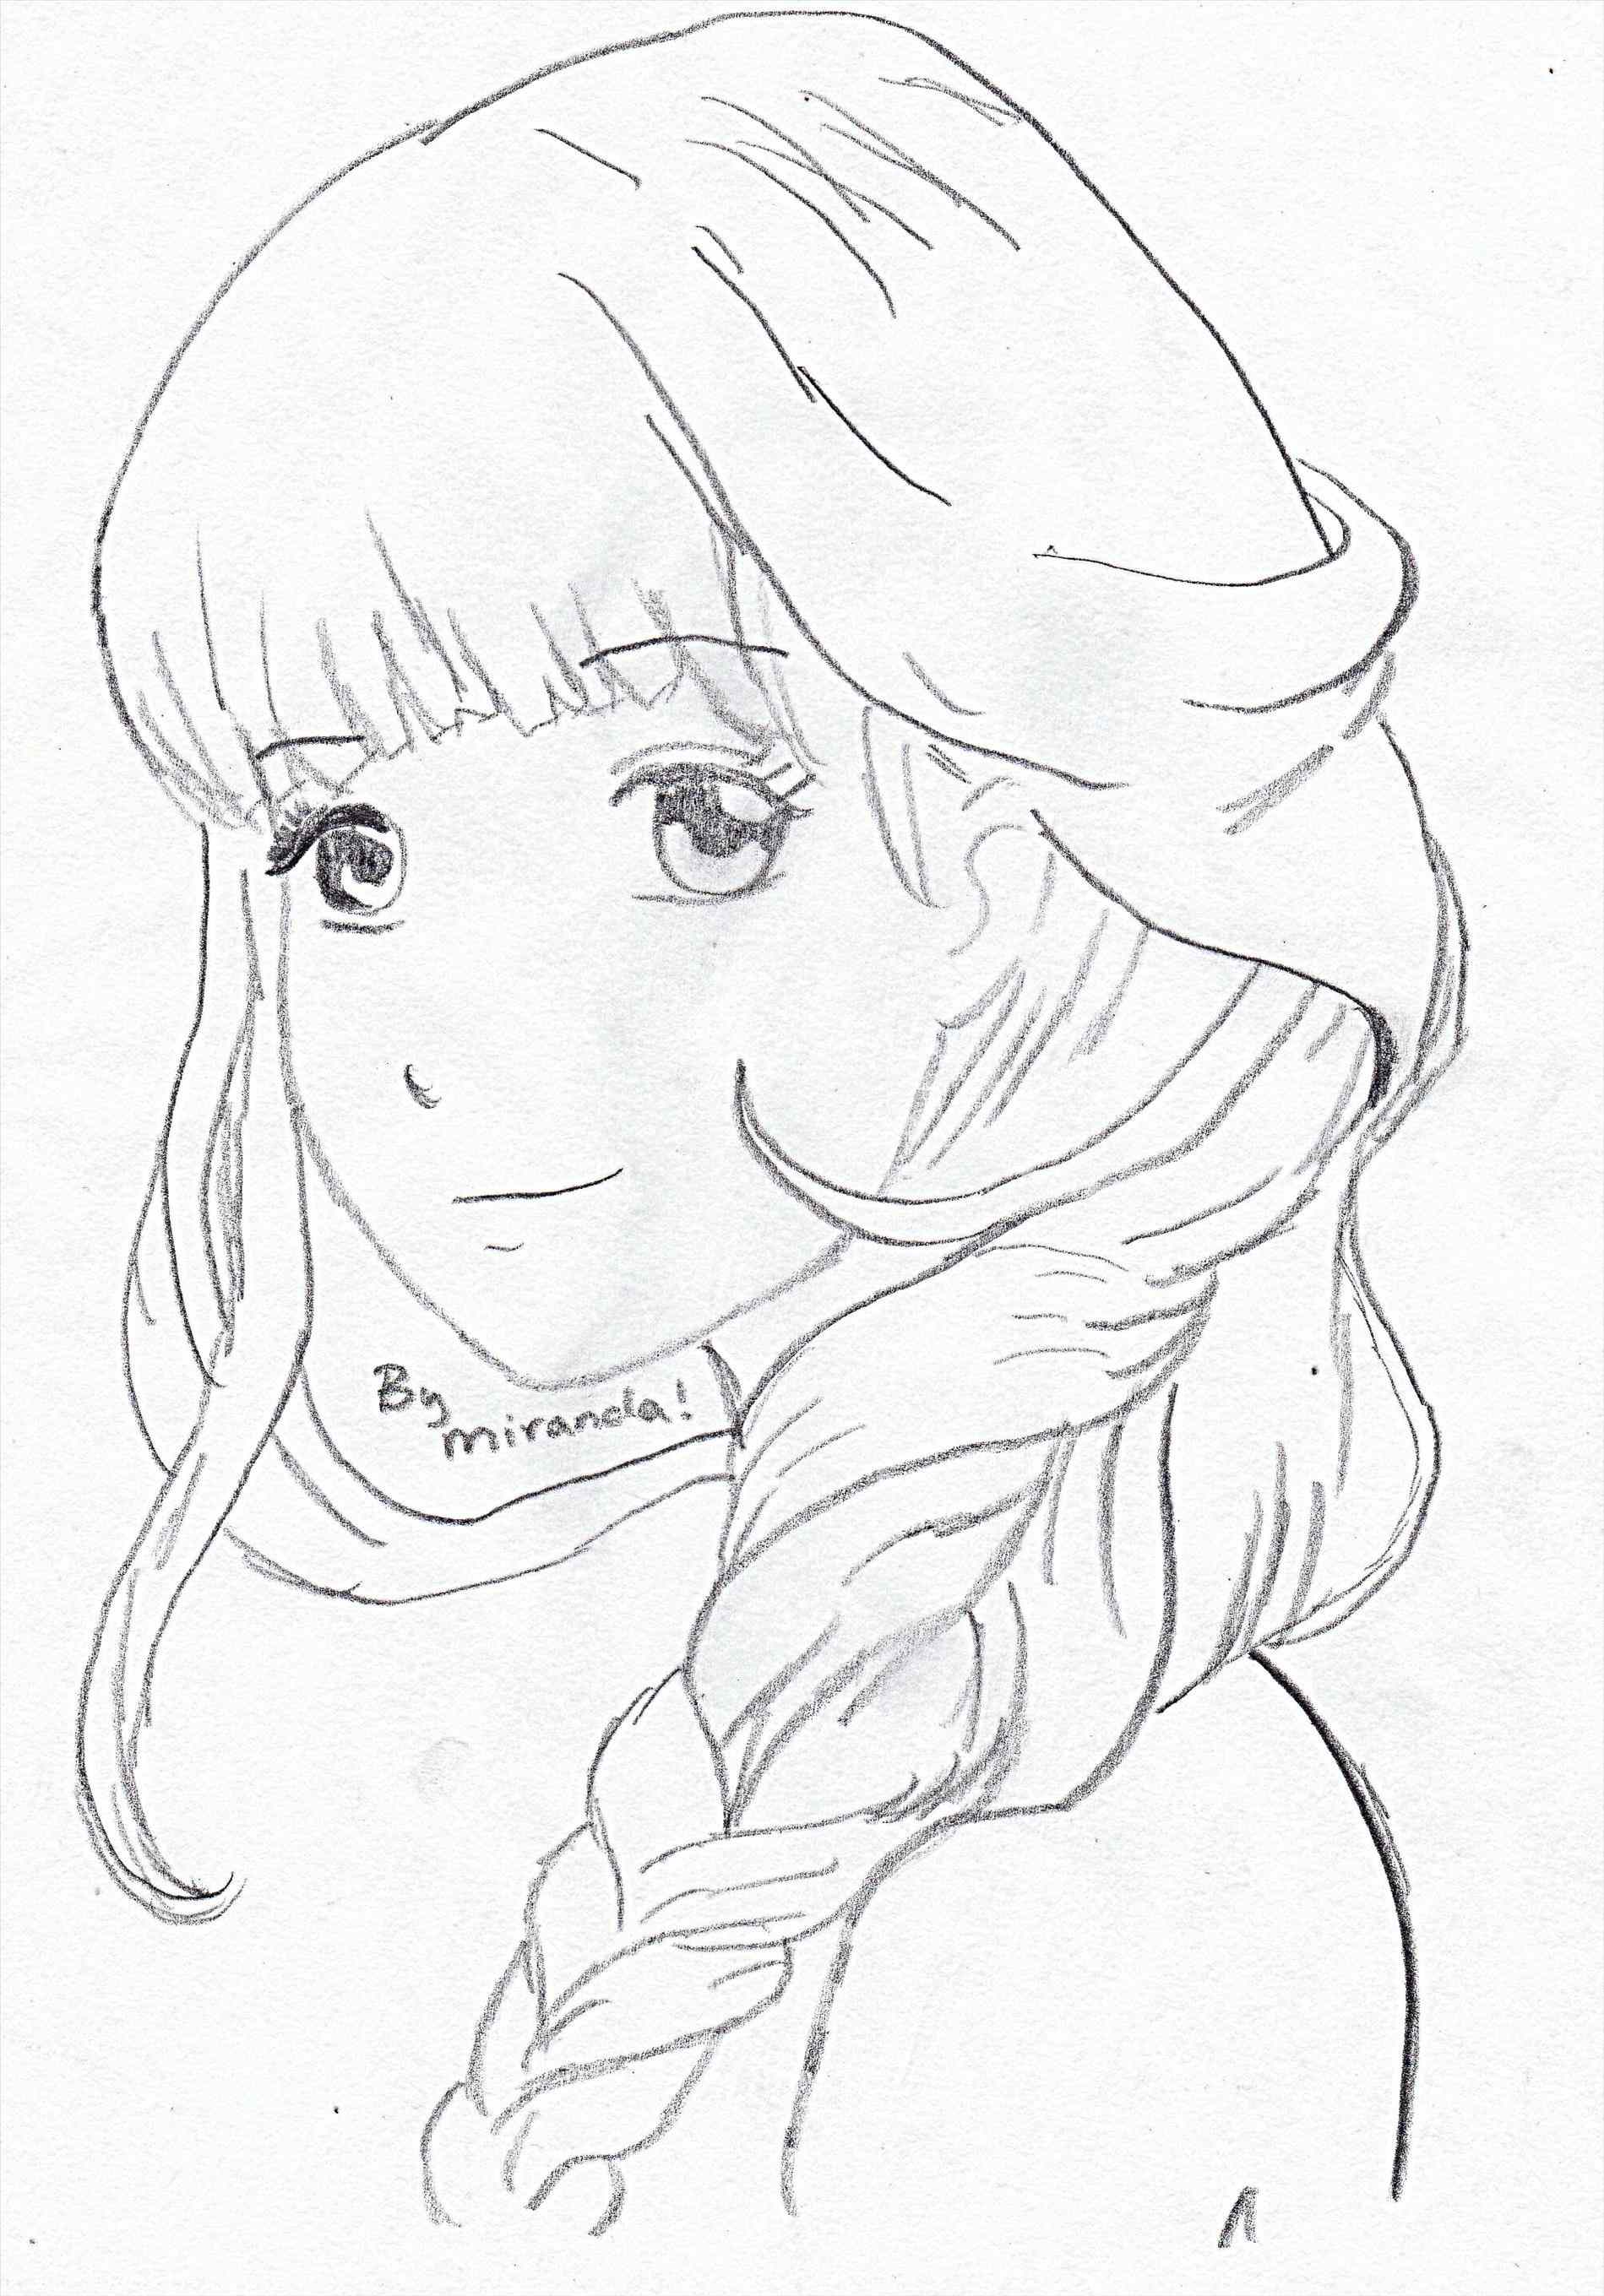 Side Profile Face Woman Drawing at GetDrawings.com | Free for personal use Side Profile Face ...